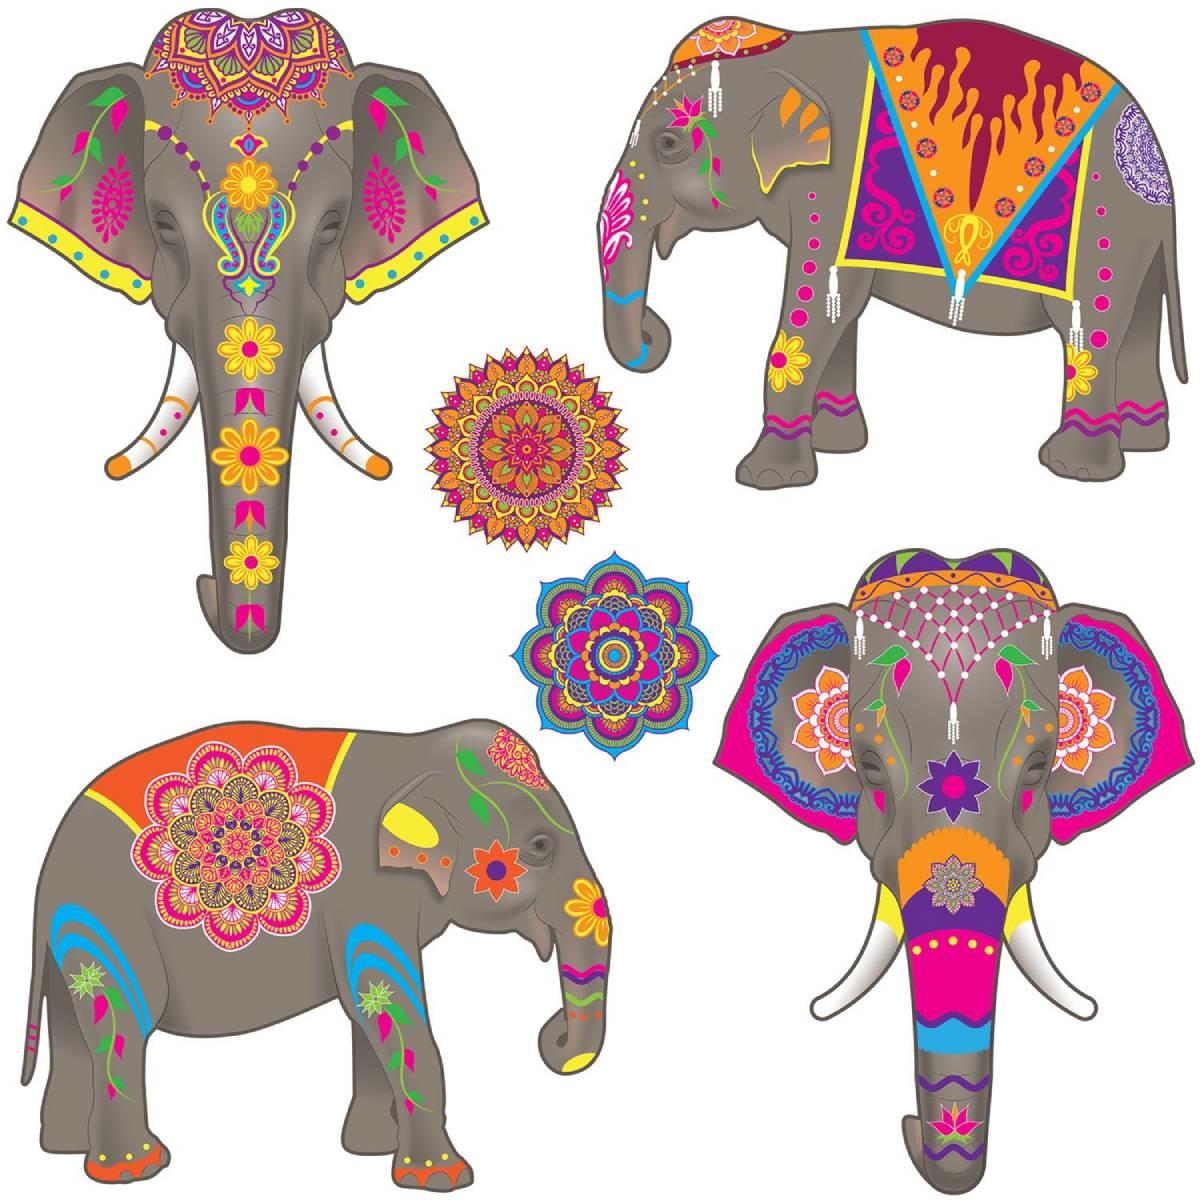 Decorated elephant cutouts with mandalas by Beistle 53563 available here at Karnival Costumes online party shop